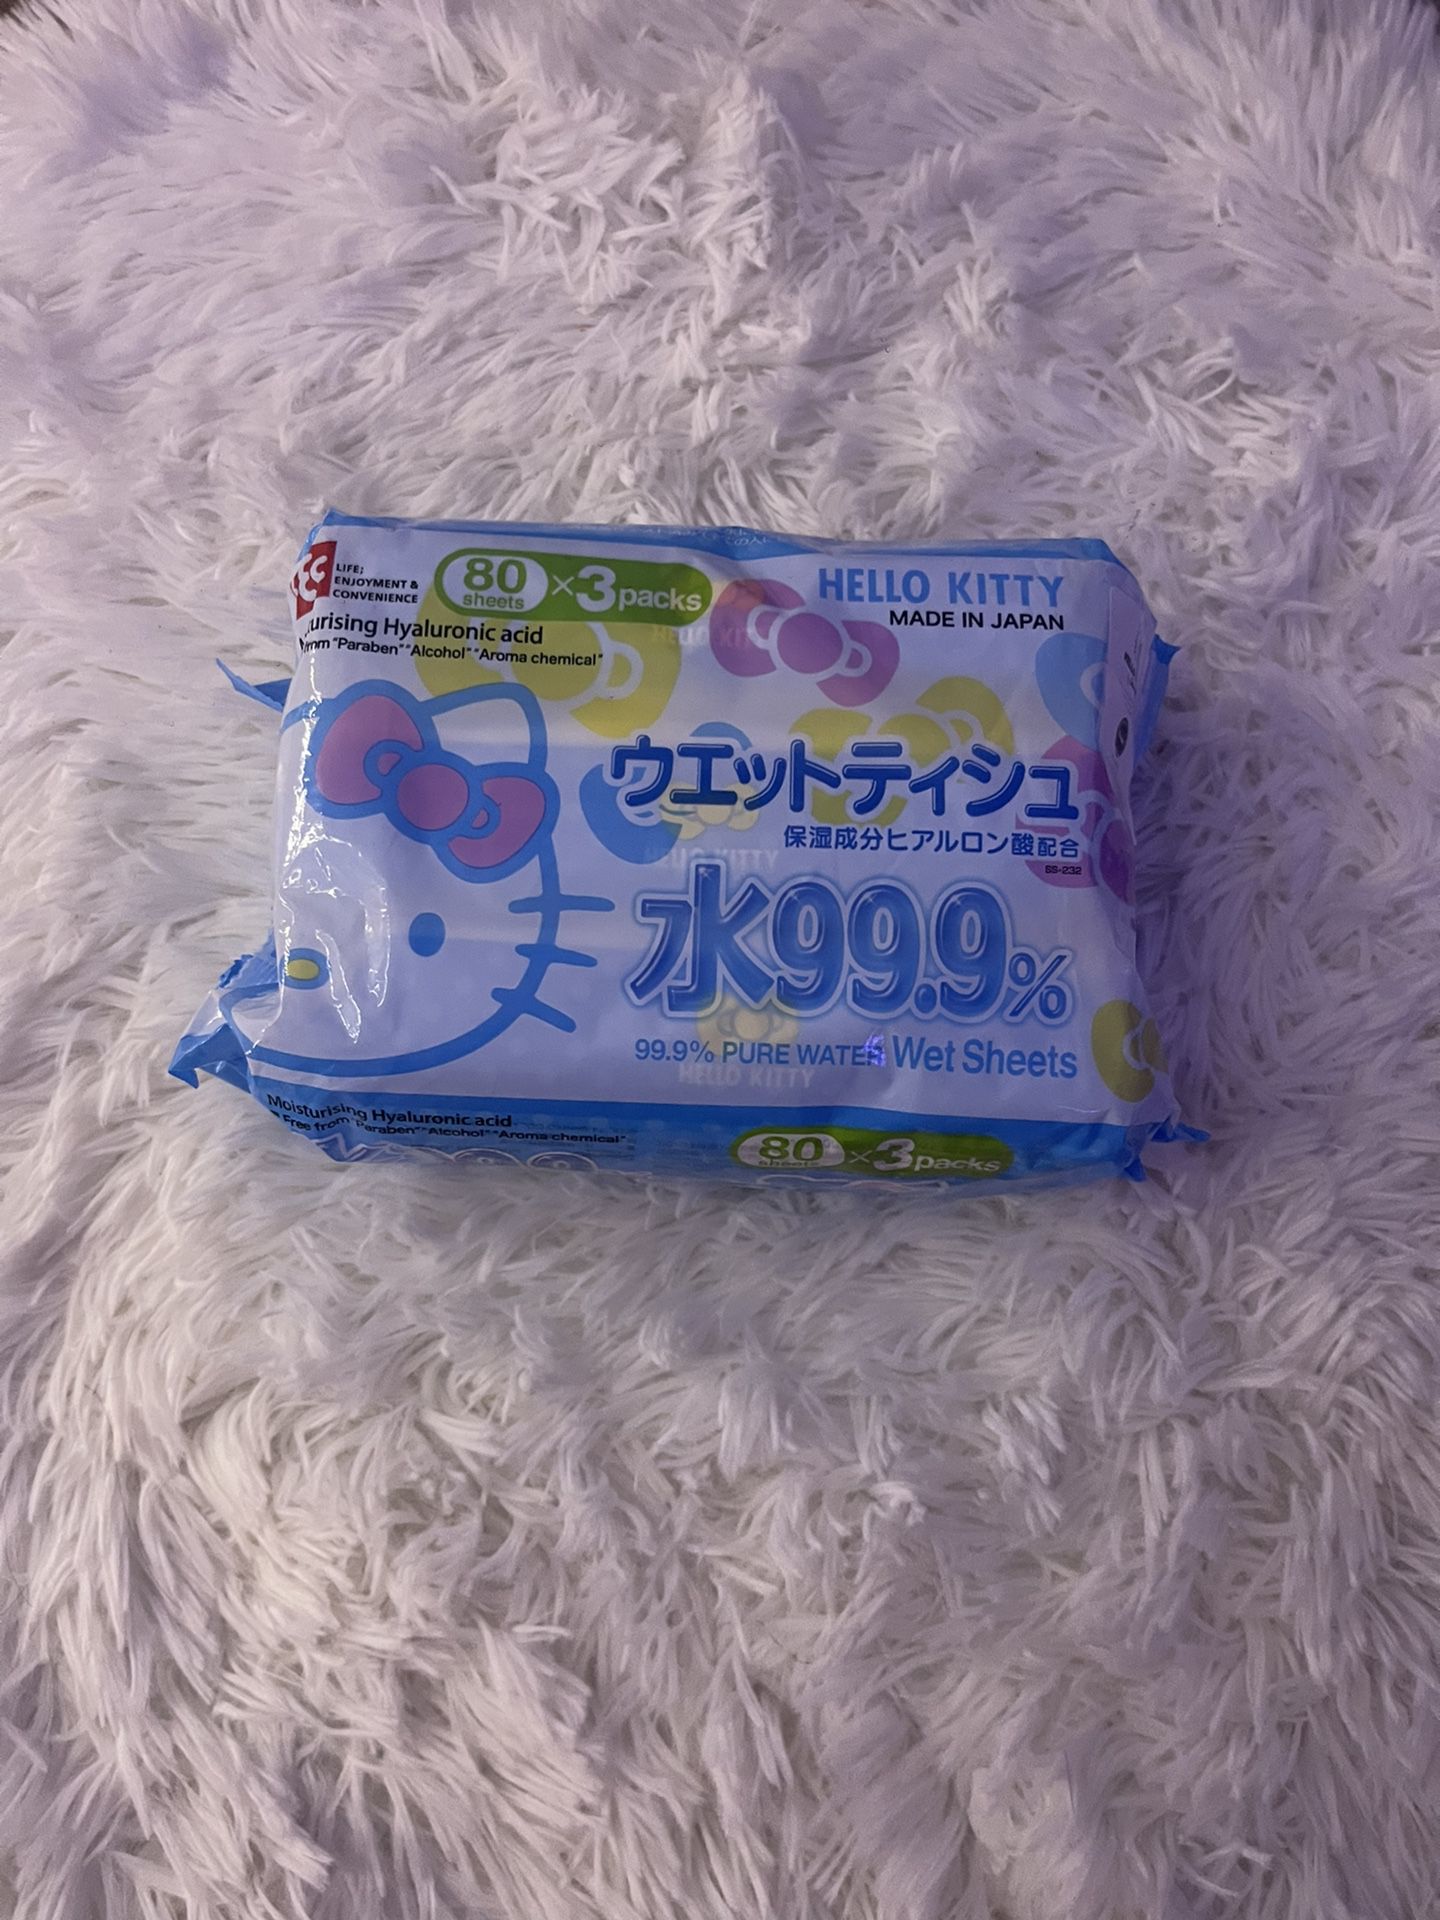 Hello kitty 3 pack of wipes